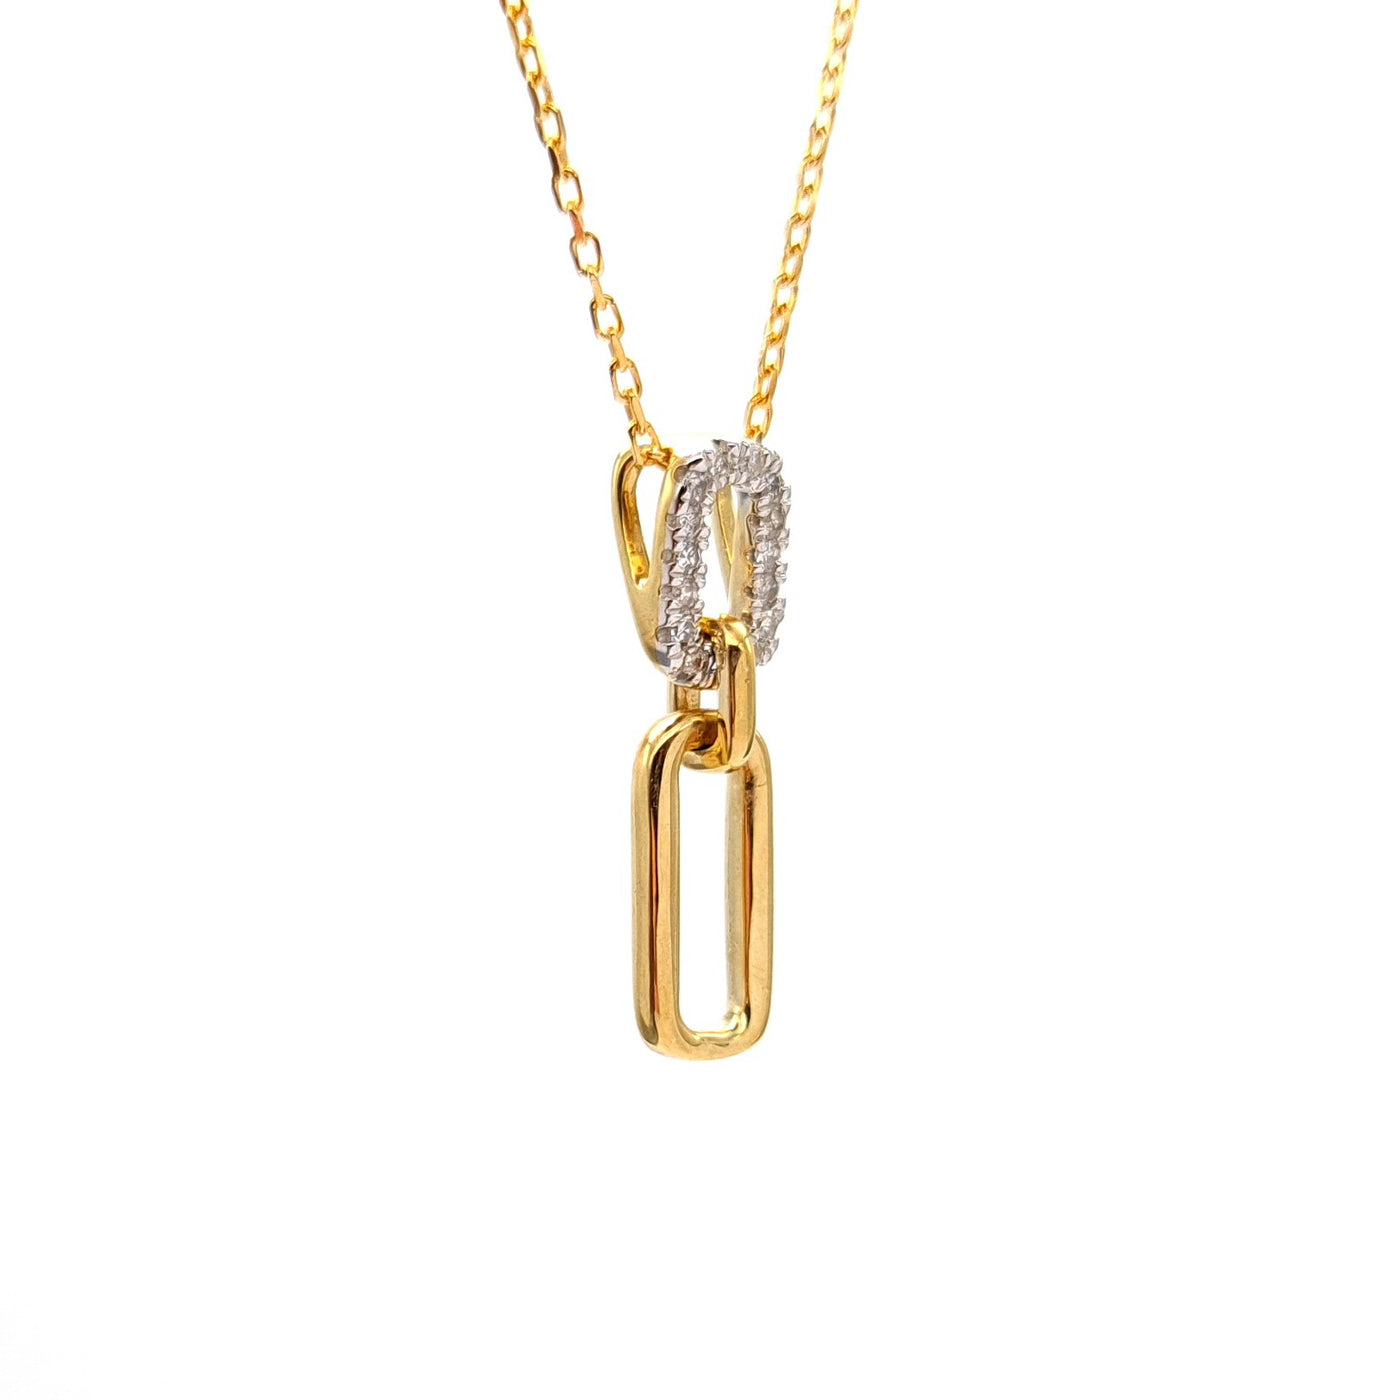 Forever Linked Diamond and Gold Pendant